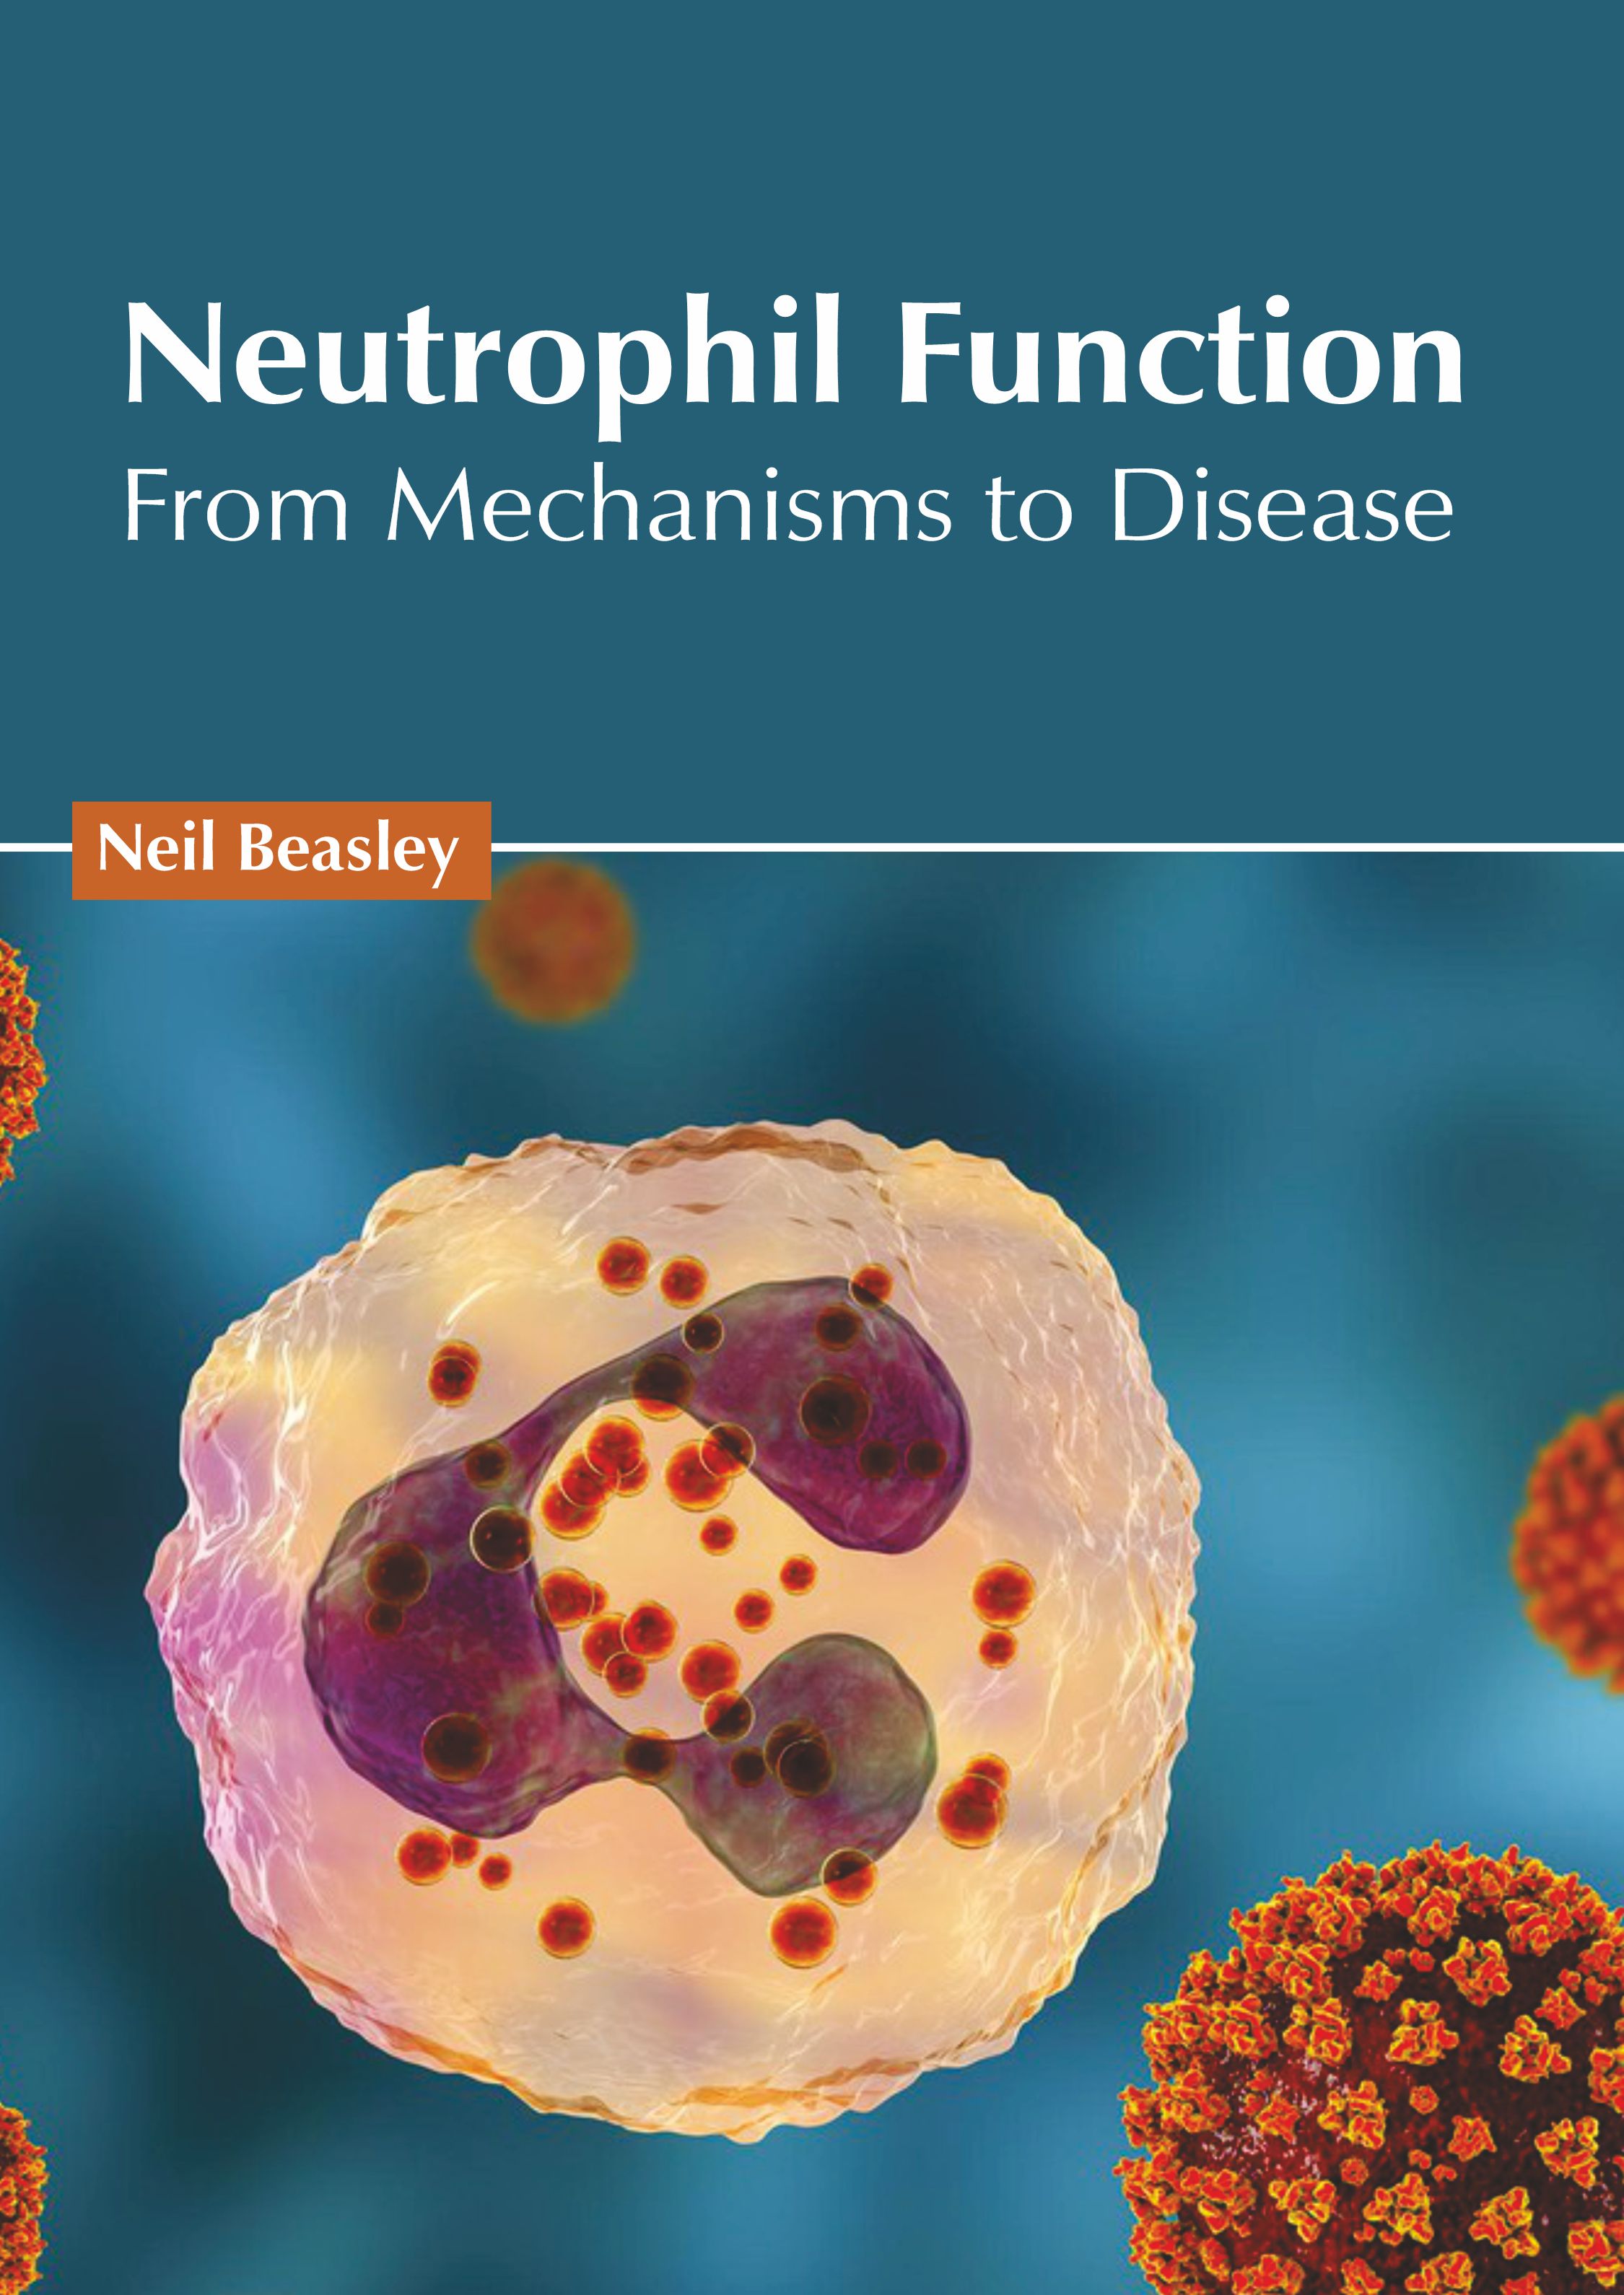 

exclusive-publishers/american-medical-publishers/neutrophil-function-from-mechanisms-to-disease-9781639271849